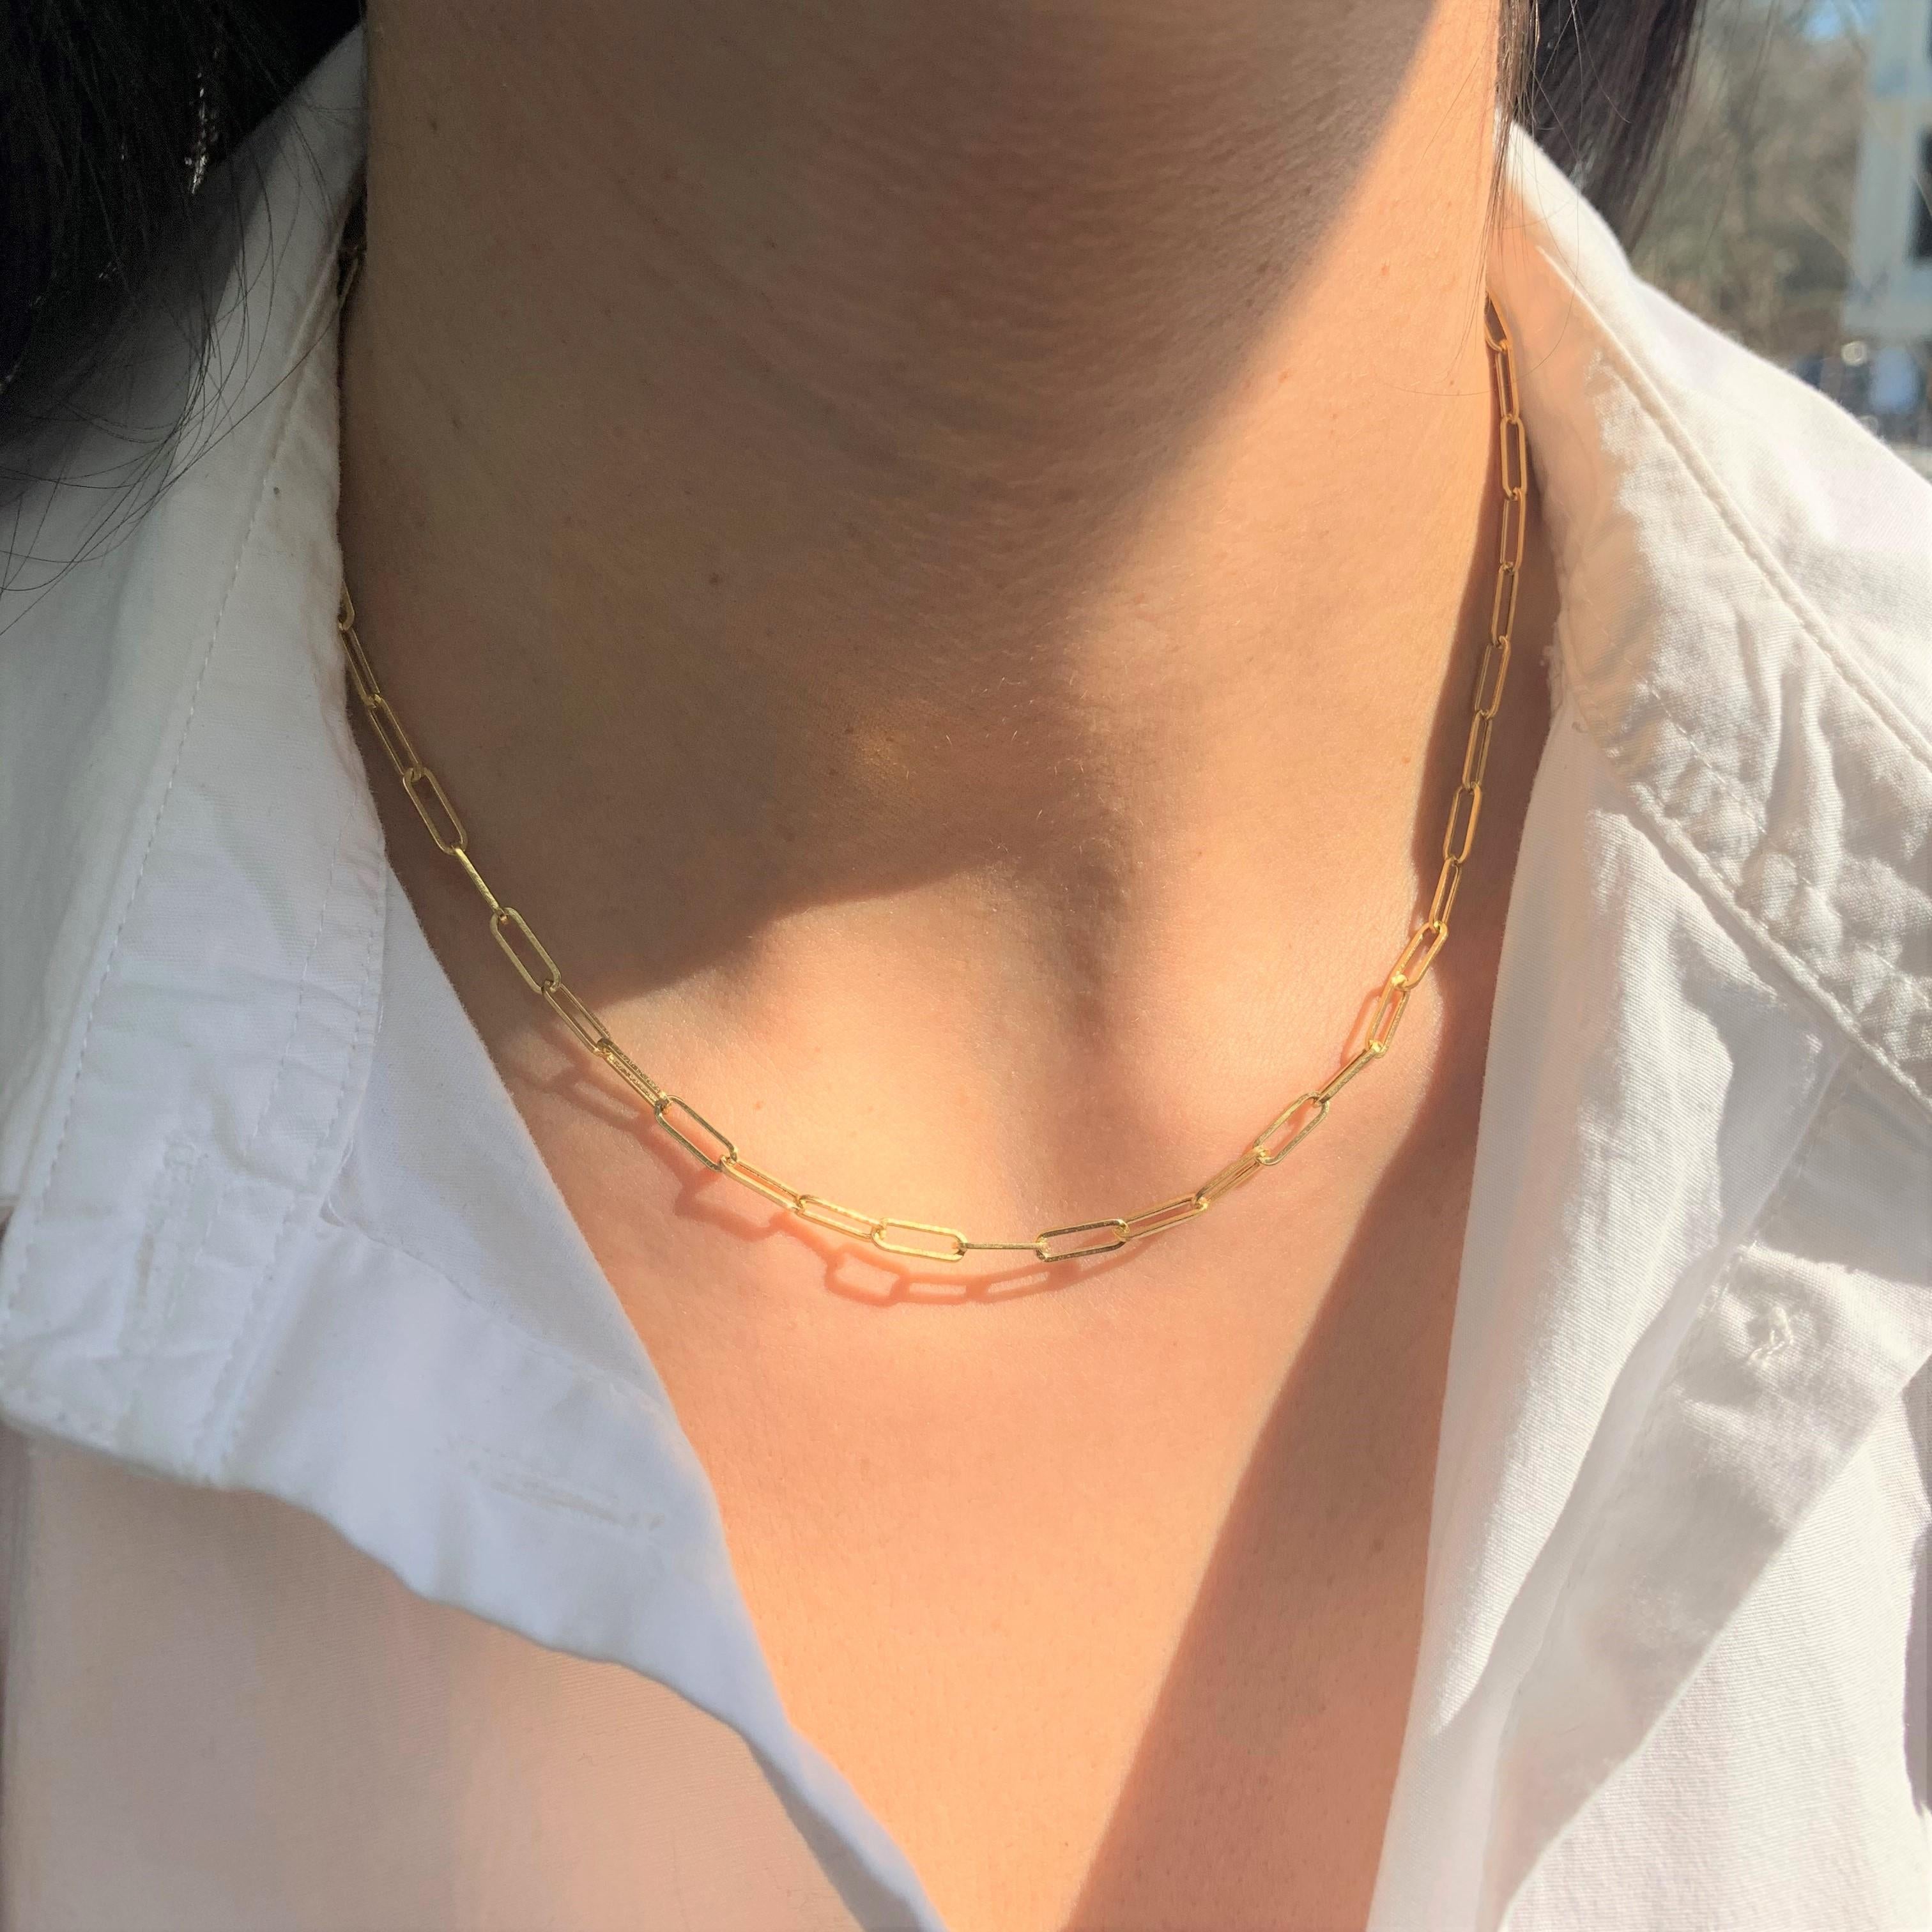 paperclip necklace when worn